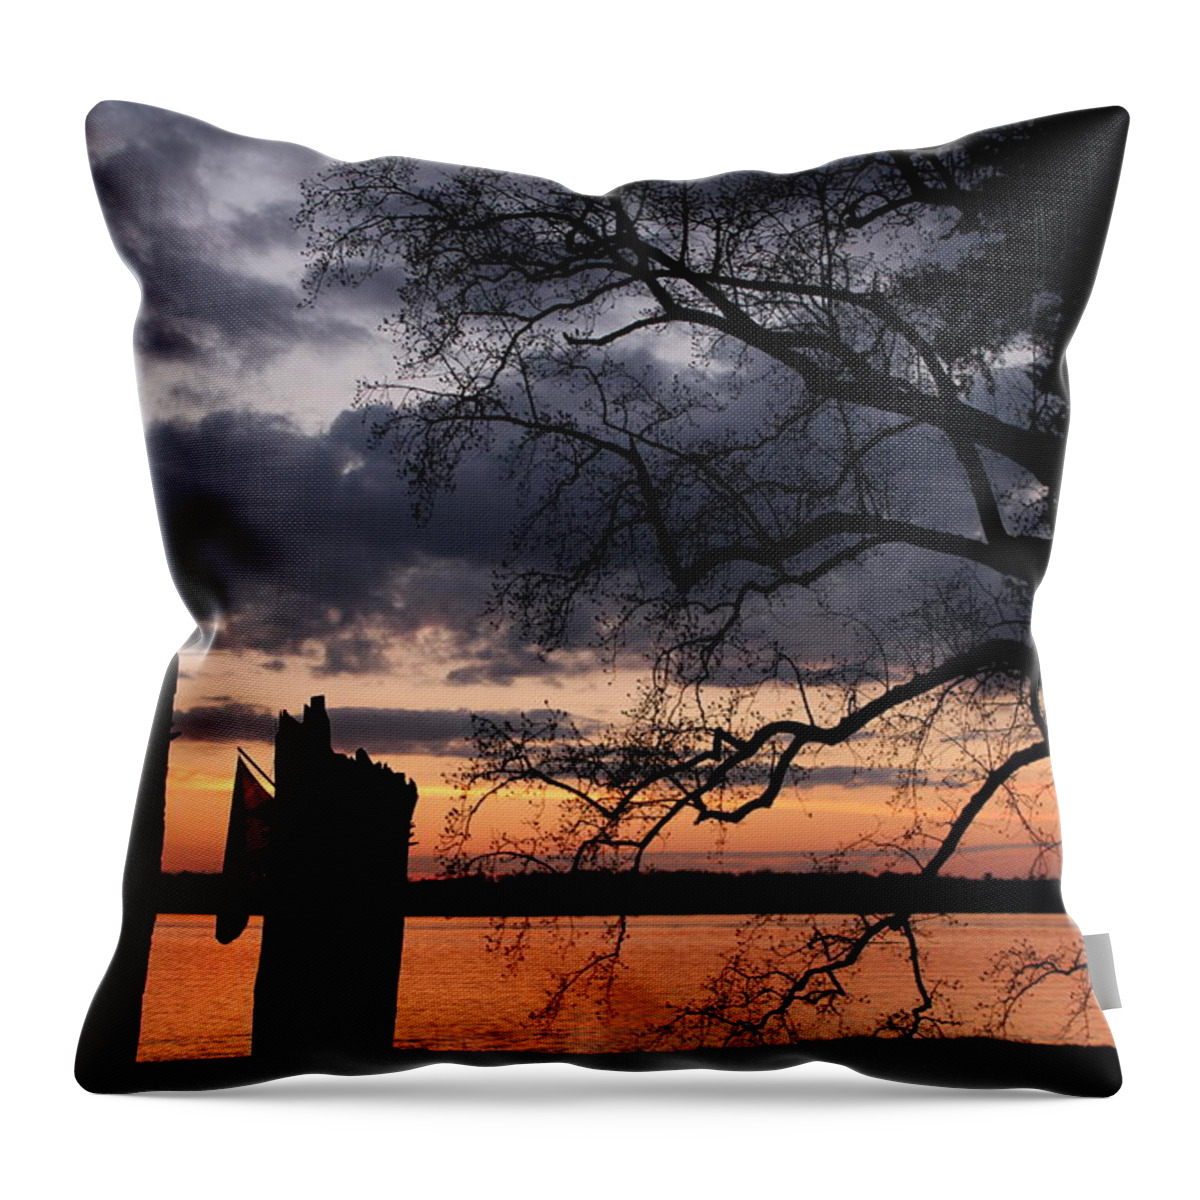 Jamestown Throw Pillow featuring the photograph Jamestown, Virginia by Dr Janine Williams